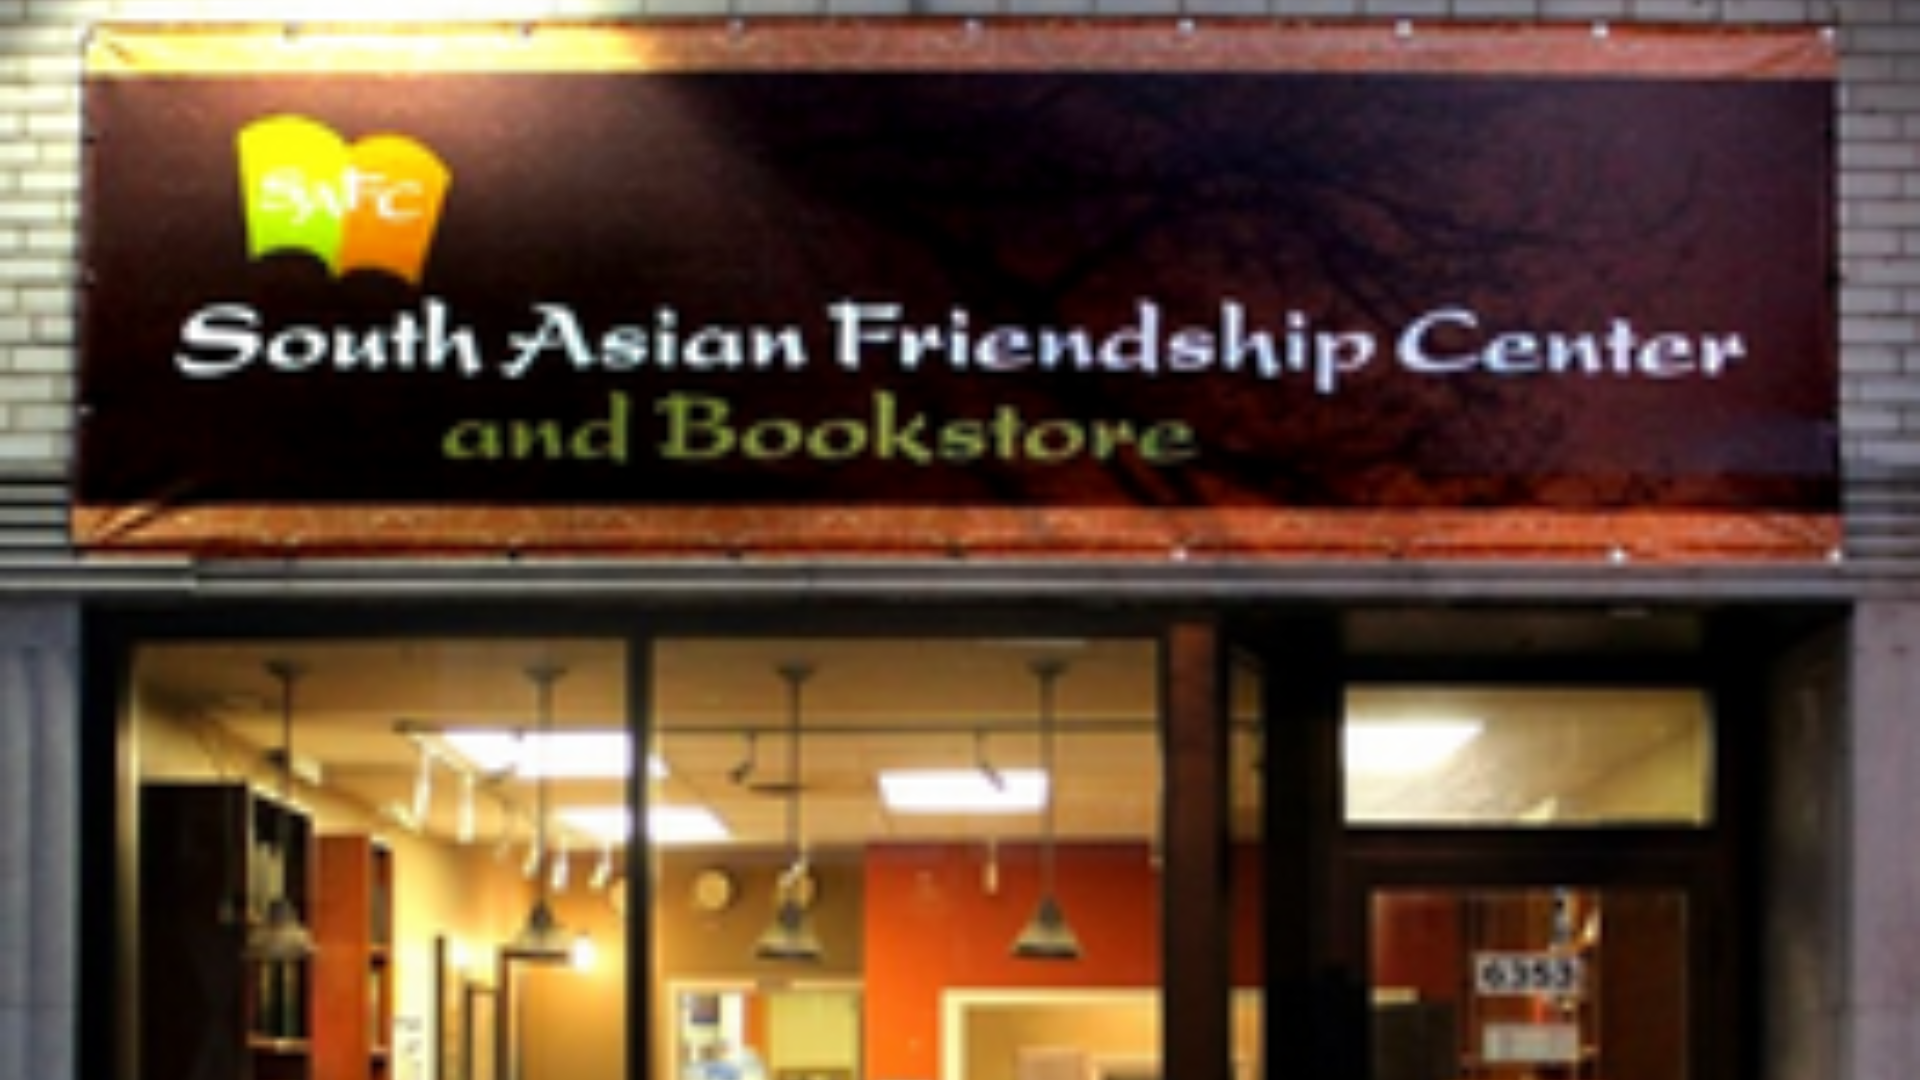 South Asian Friendship Center
Multiplying Churches & Disciples, Transforming Communities
